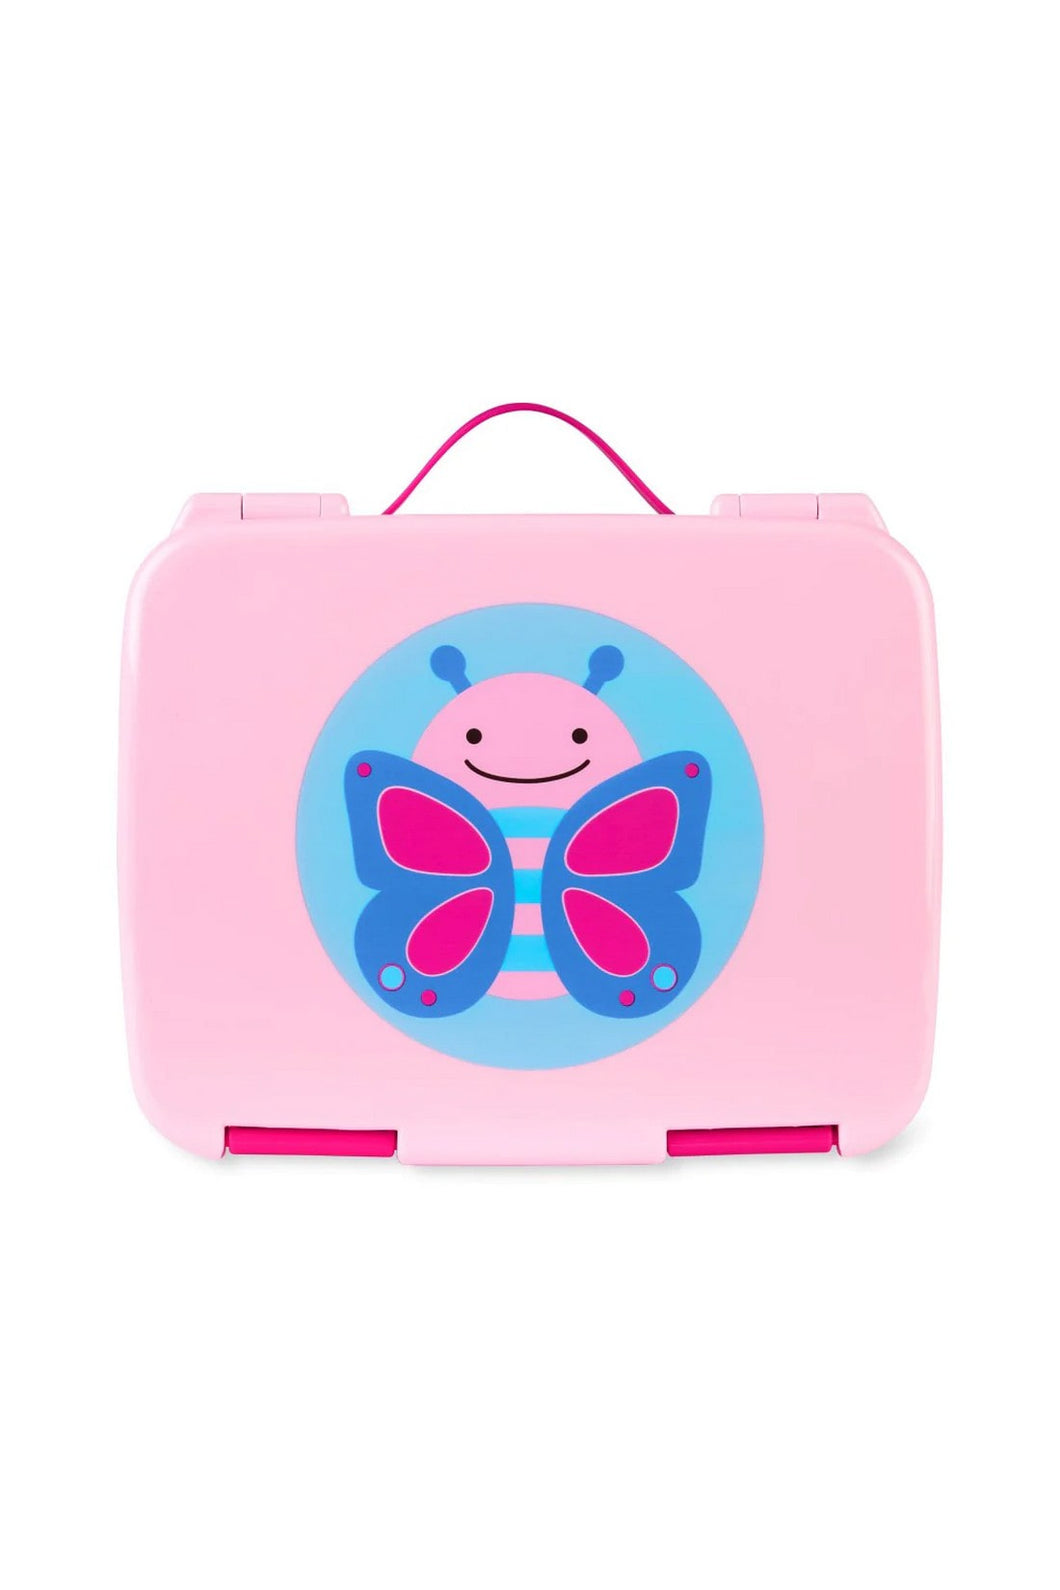 Skip Hop Zoo Bento Lunch Box - Butterfly 1